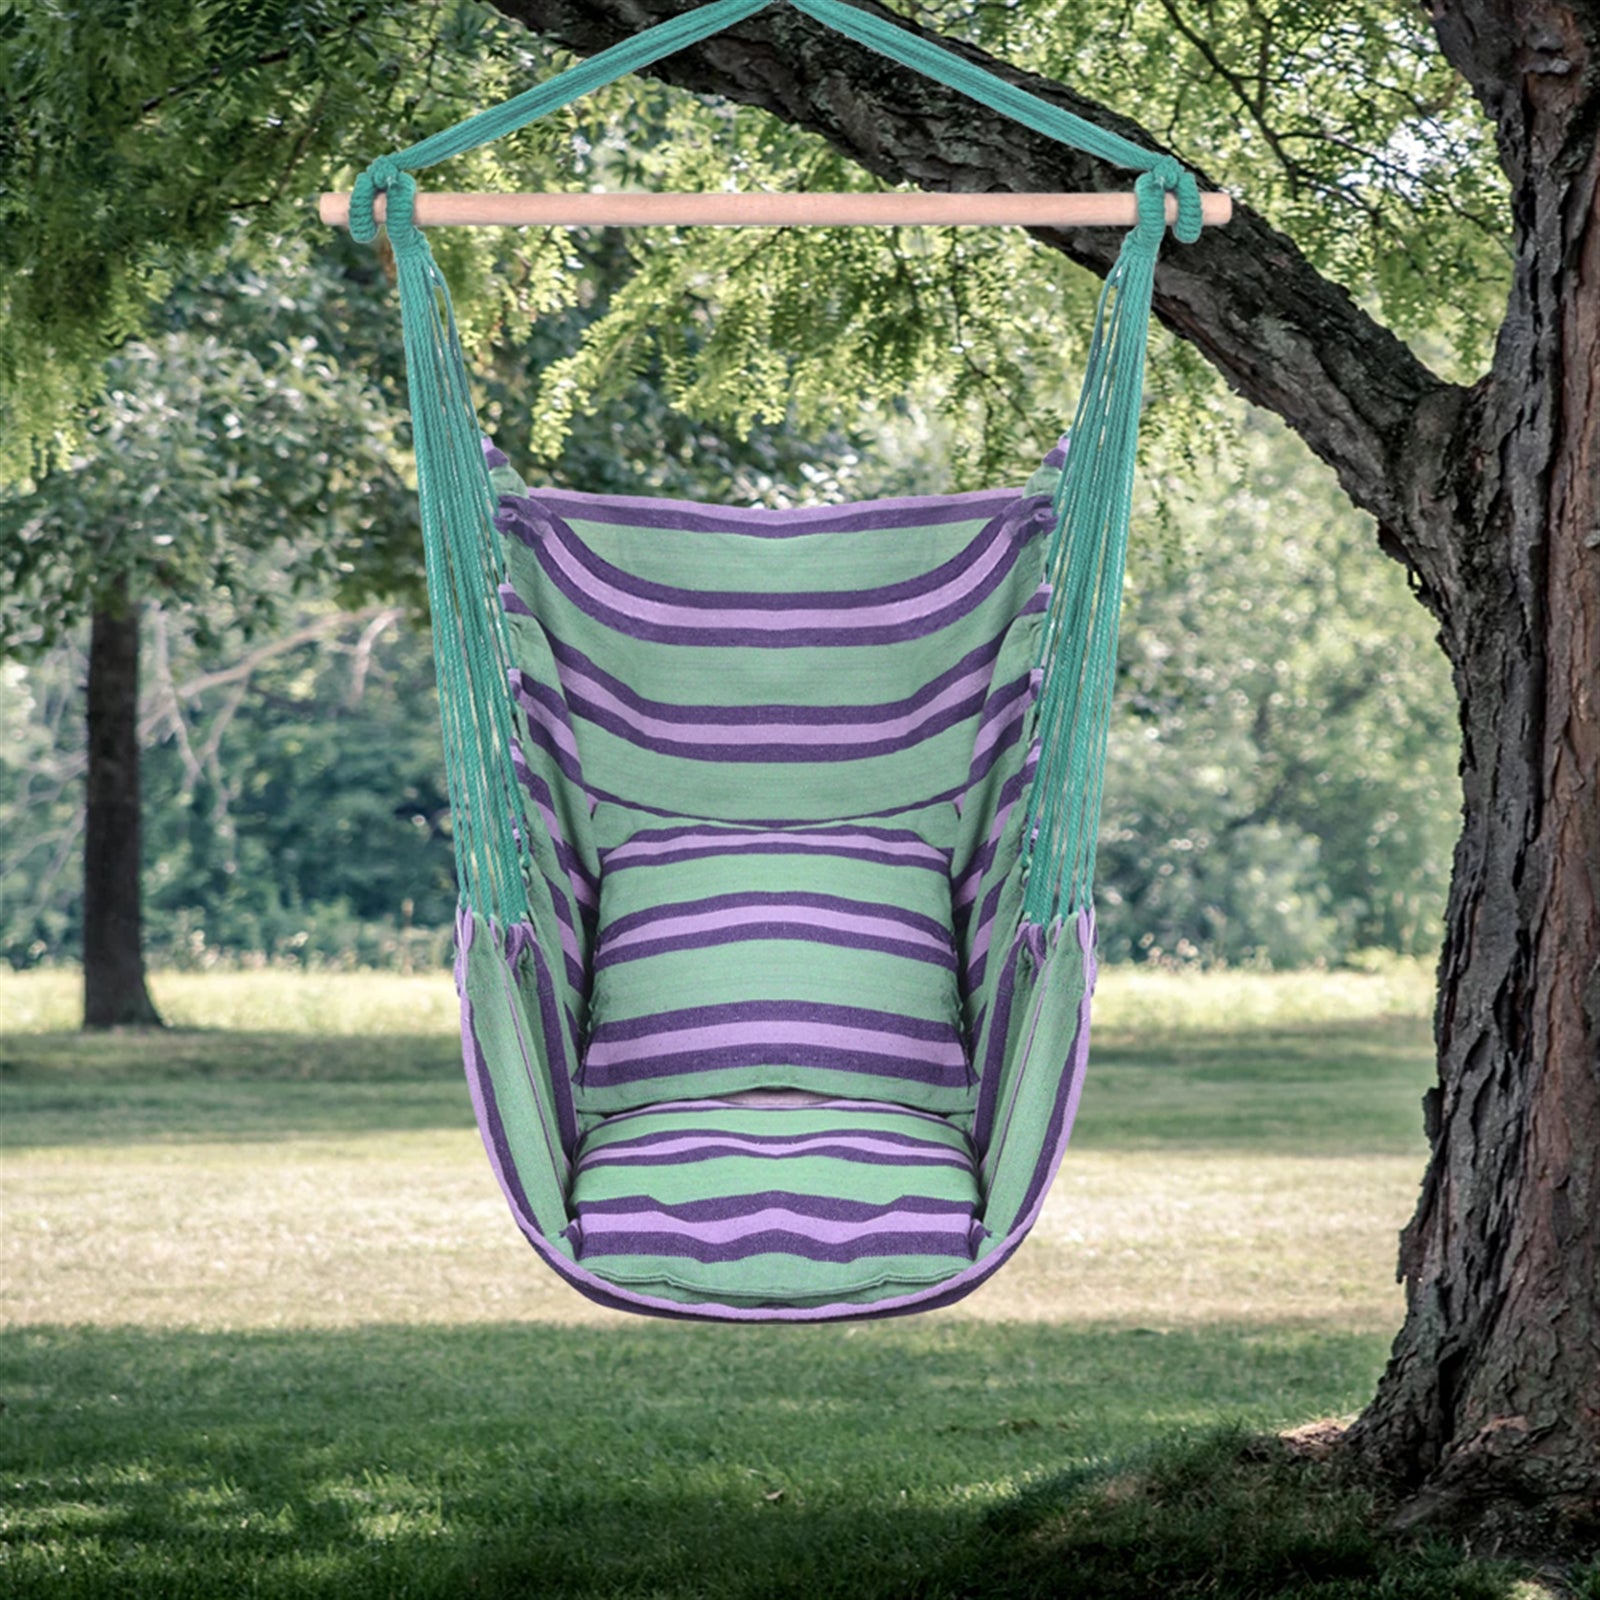 SUGIFT Hammock Chair, Large Swing Chair Suitable for Indoor and Outdoor Use, Blue Stripes